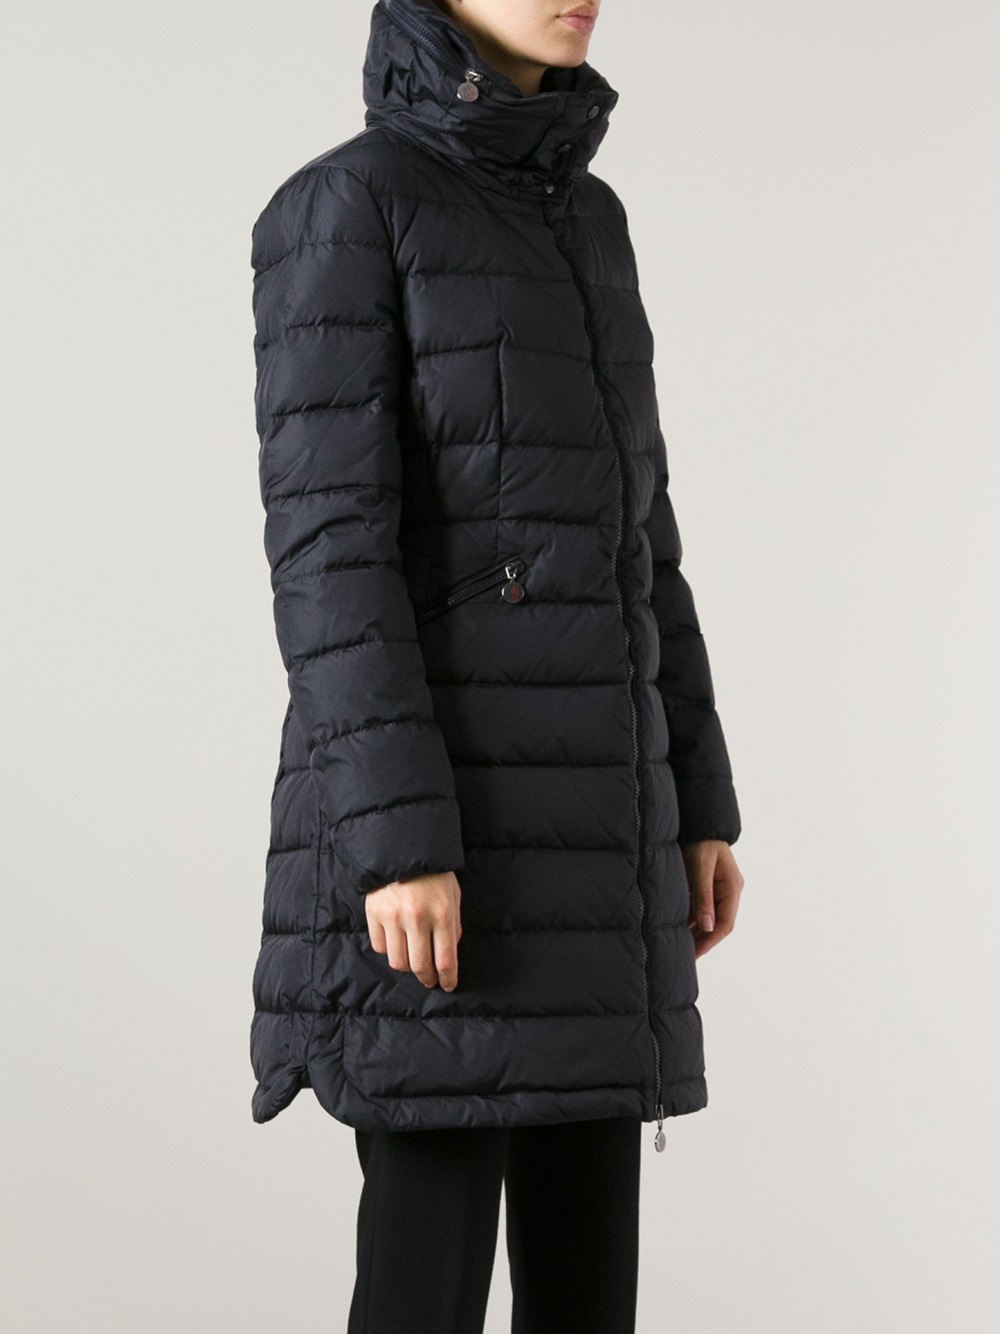 Lyst - Moncler Flamme Feather Down Coat in Blue